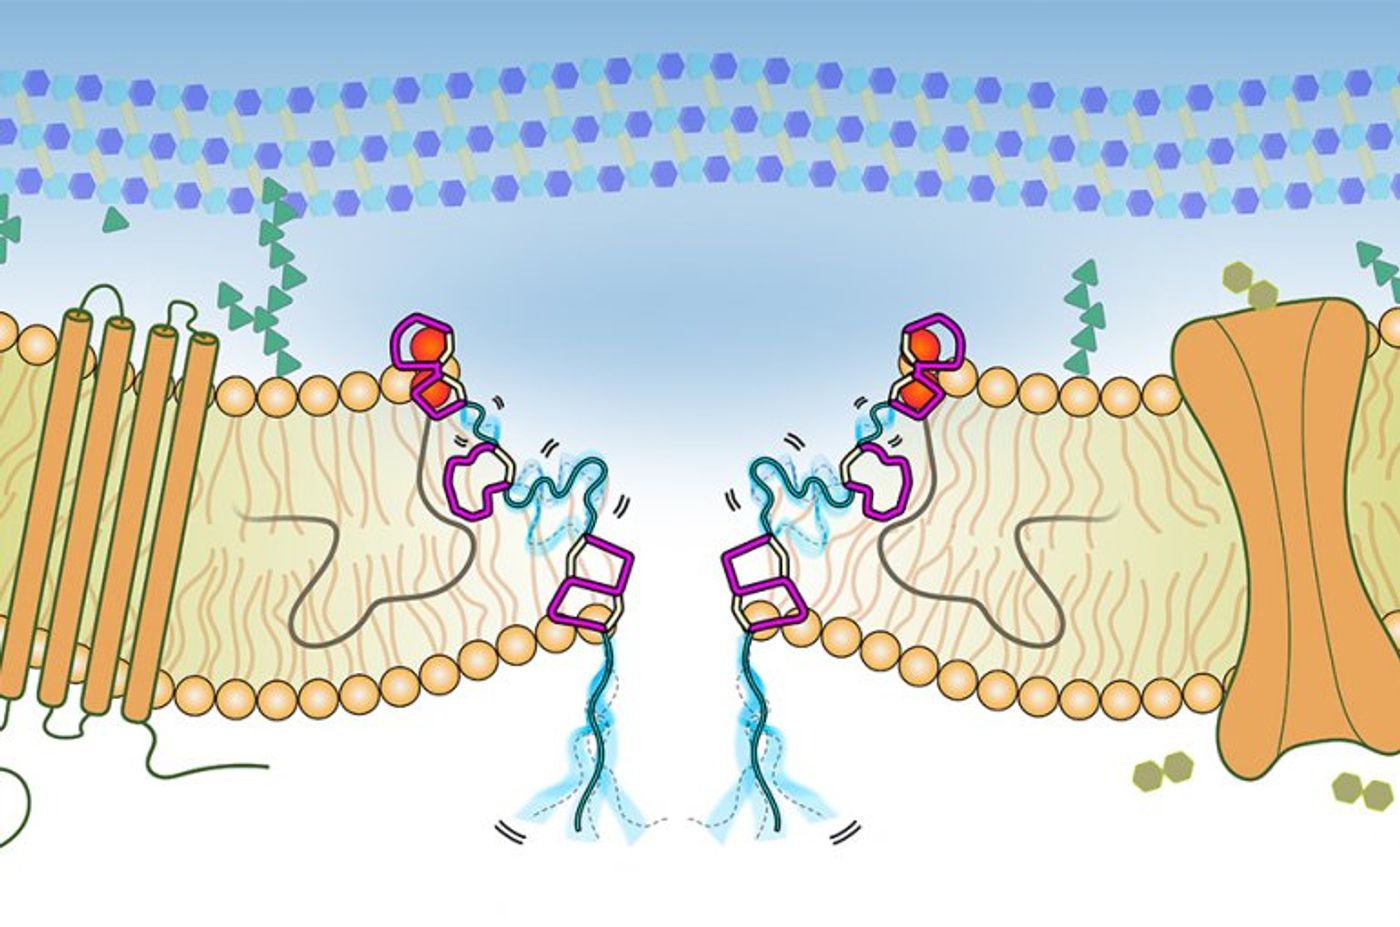 Illustration of the pore-complex formed by Lipid II and the antimicrobial peptide nisin. In cyan, flexible linker regions of nisin are highlighted that enable nisin to optimally adapt its conformation to complex bacterial cell membranes. / Credit: Utretch University